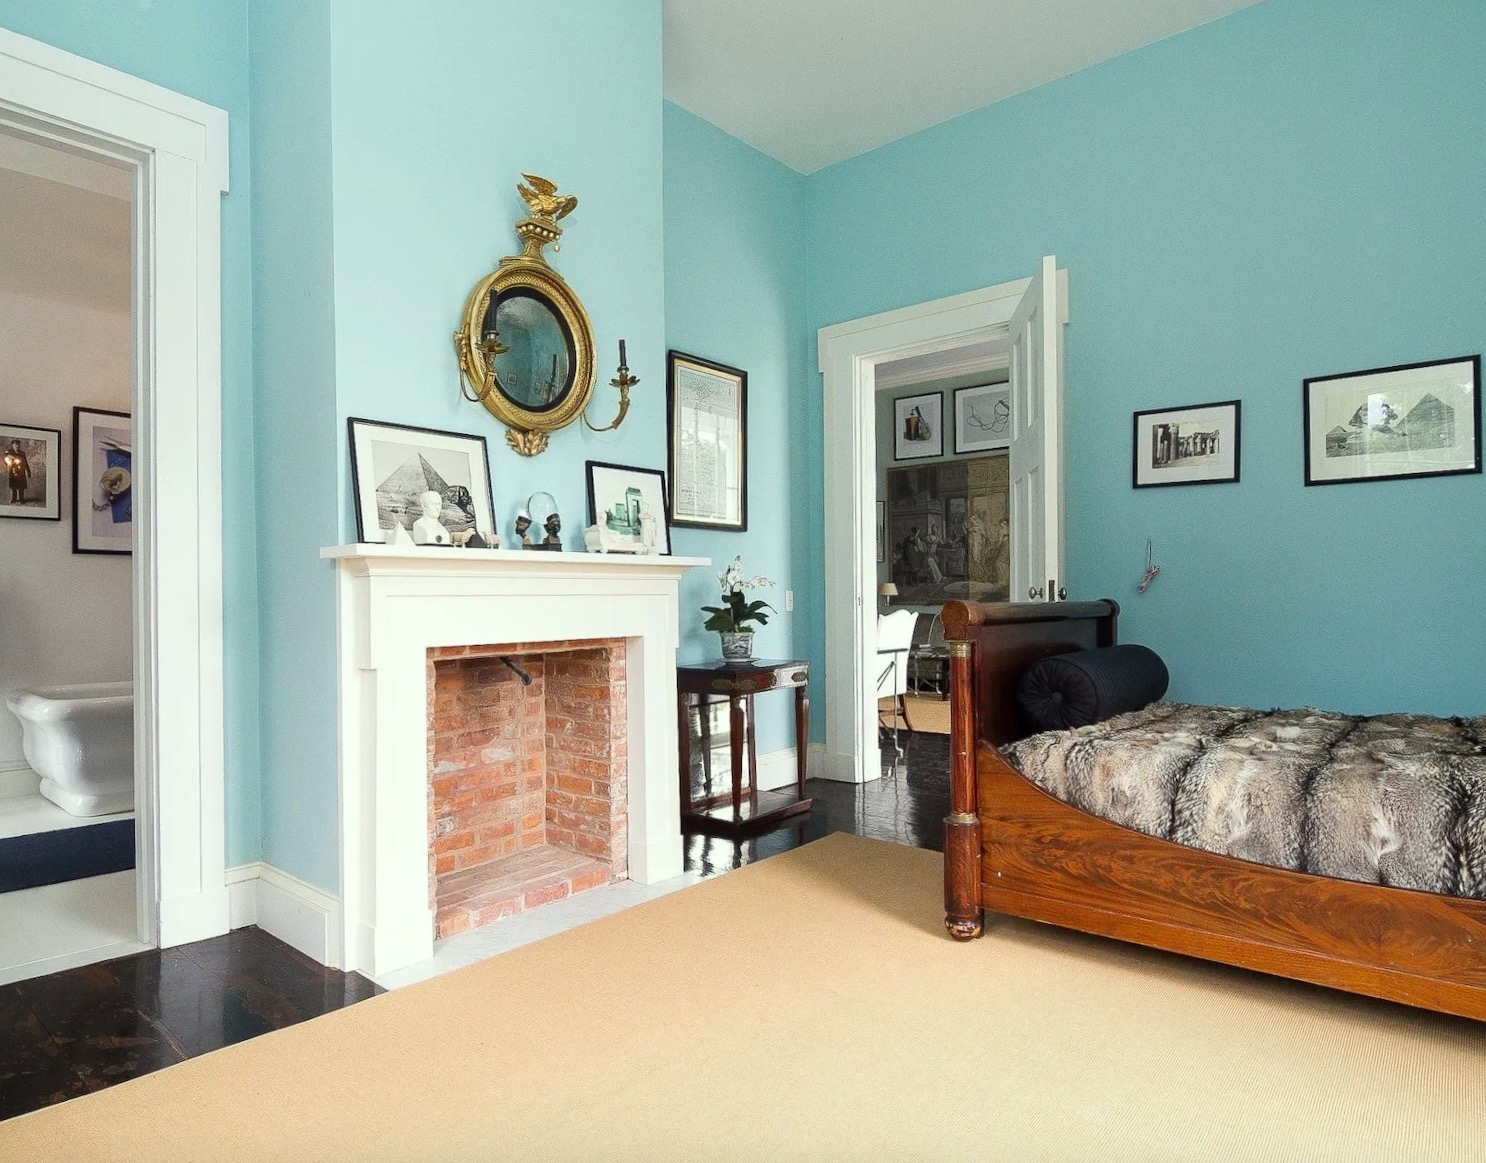 Greek Revival home Kinderhook, NY - Bedroom Benjamin Moore Tranquil Blue 2051-50 or Dolphin's Cove - neutral paint colors